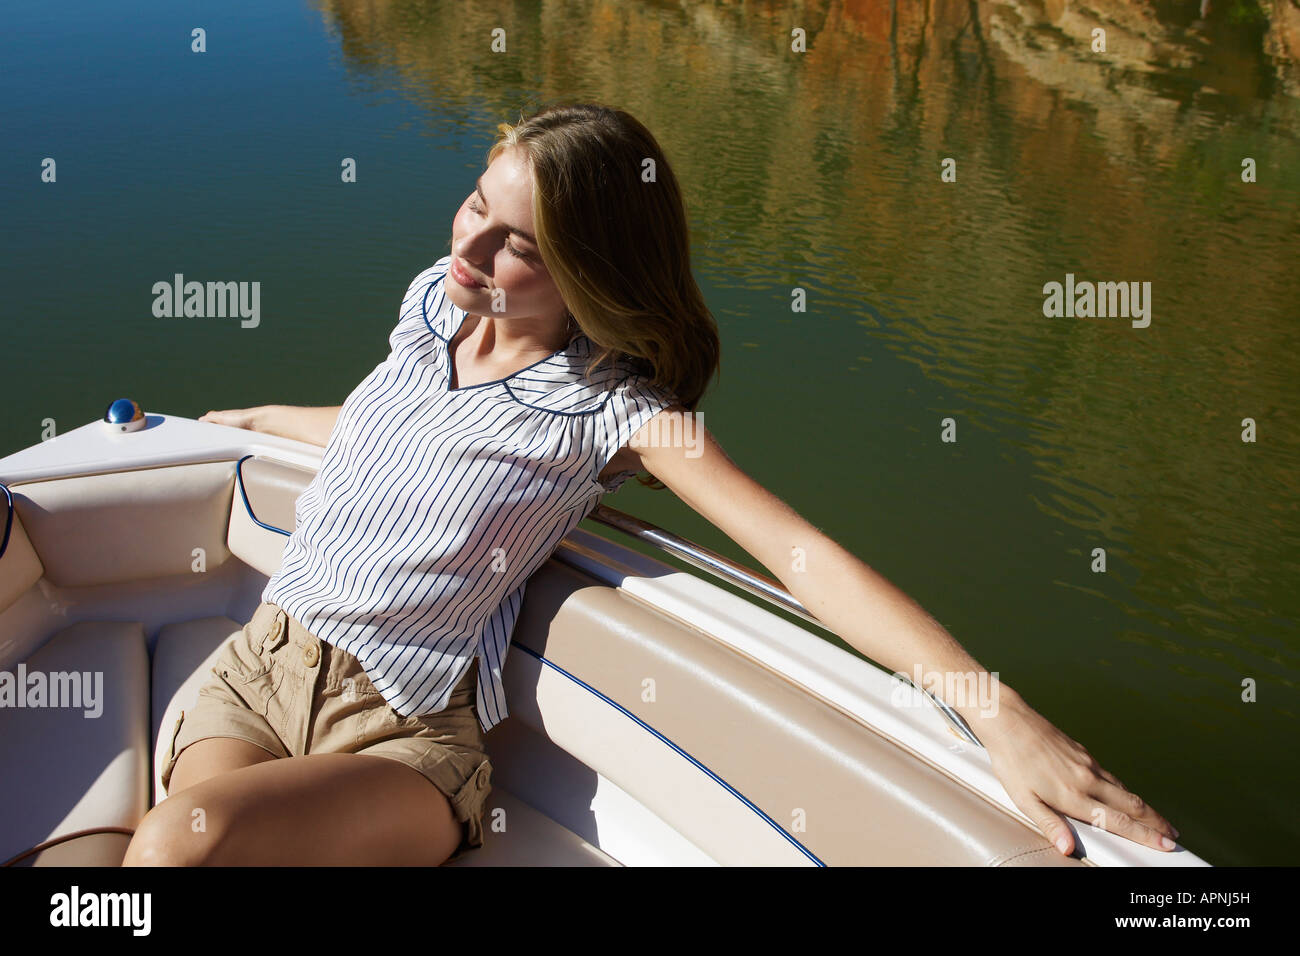 Young woman relaxing in bateau (high angle view) Banque D'Images